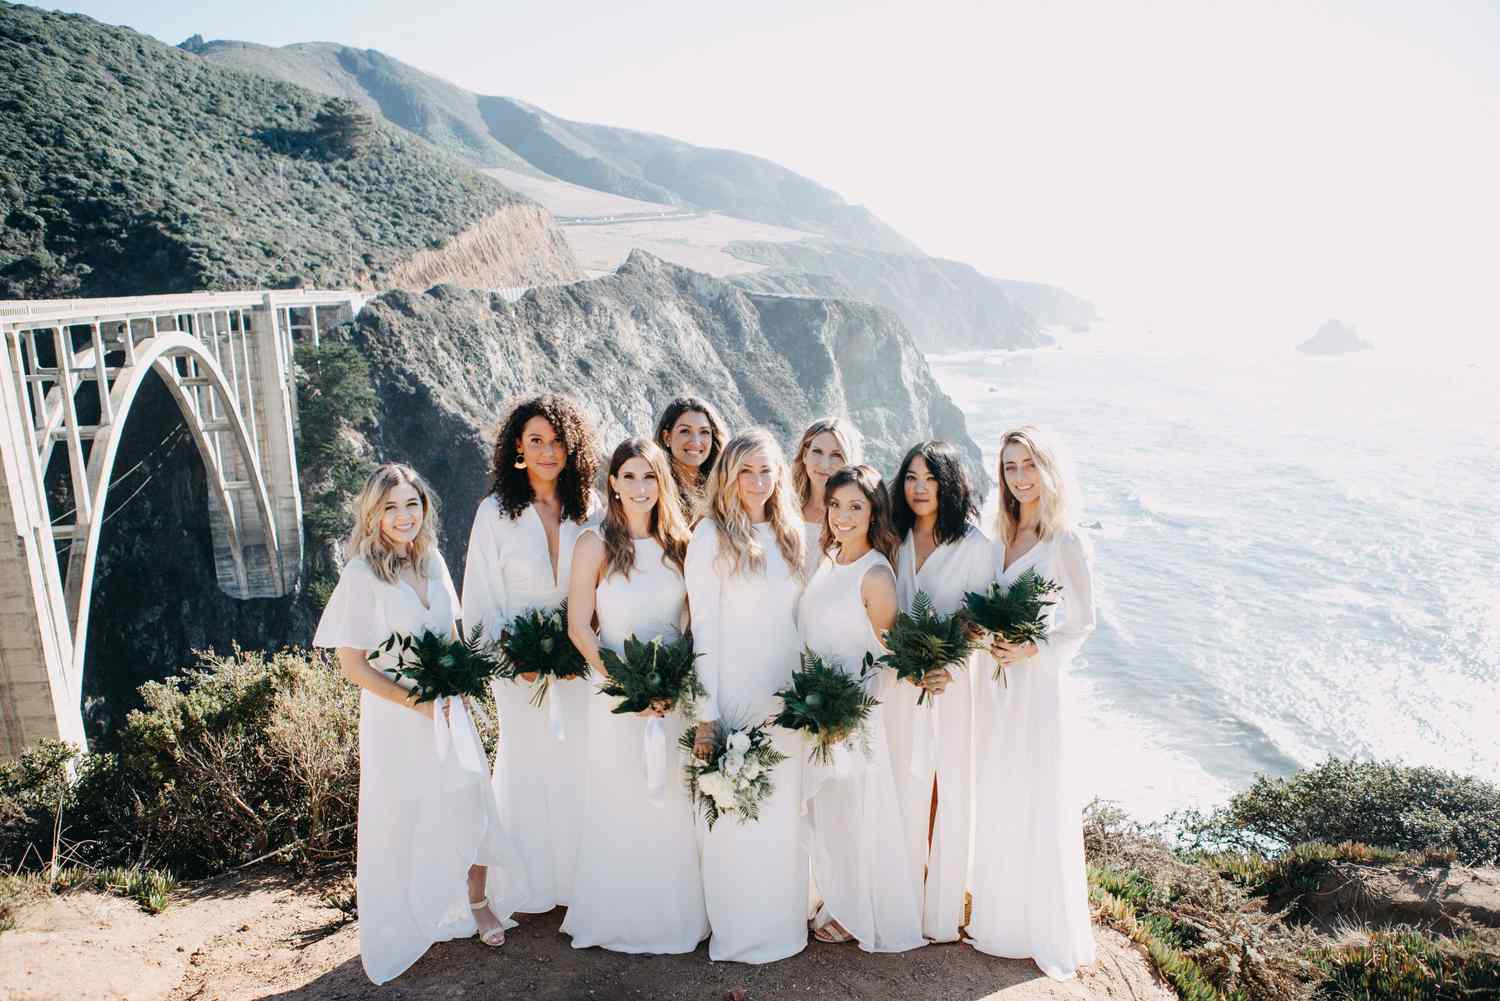 Bridesmaids' Dresses and Bouquets